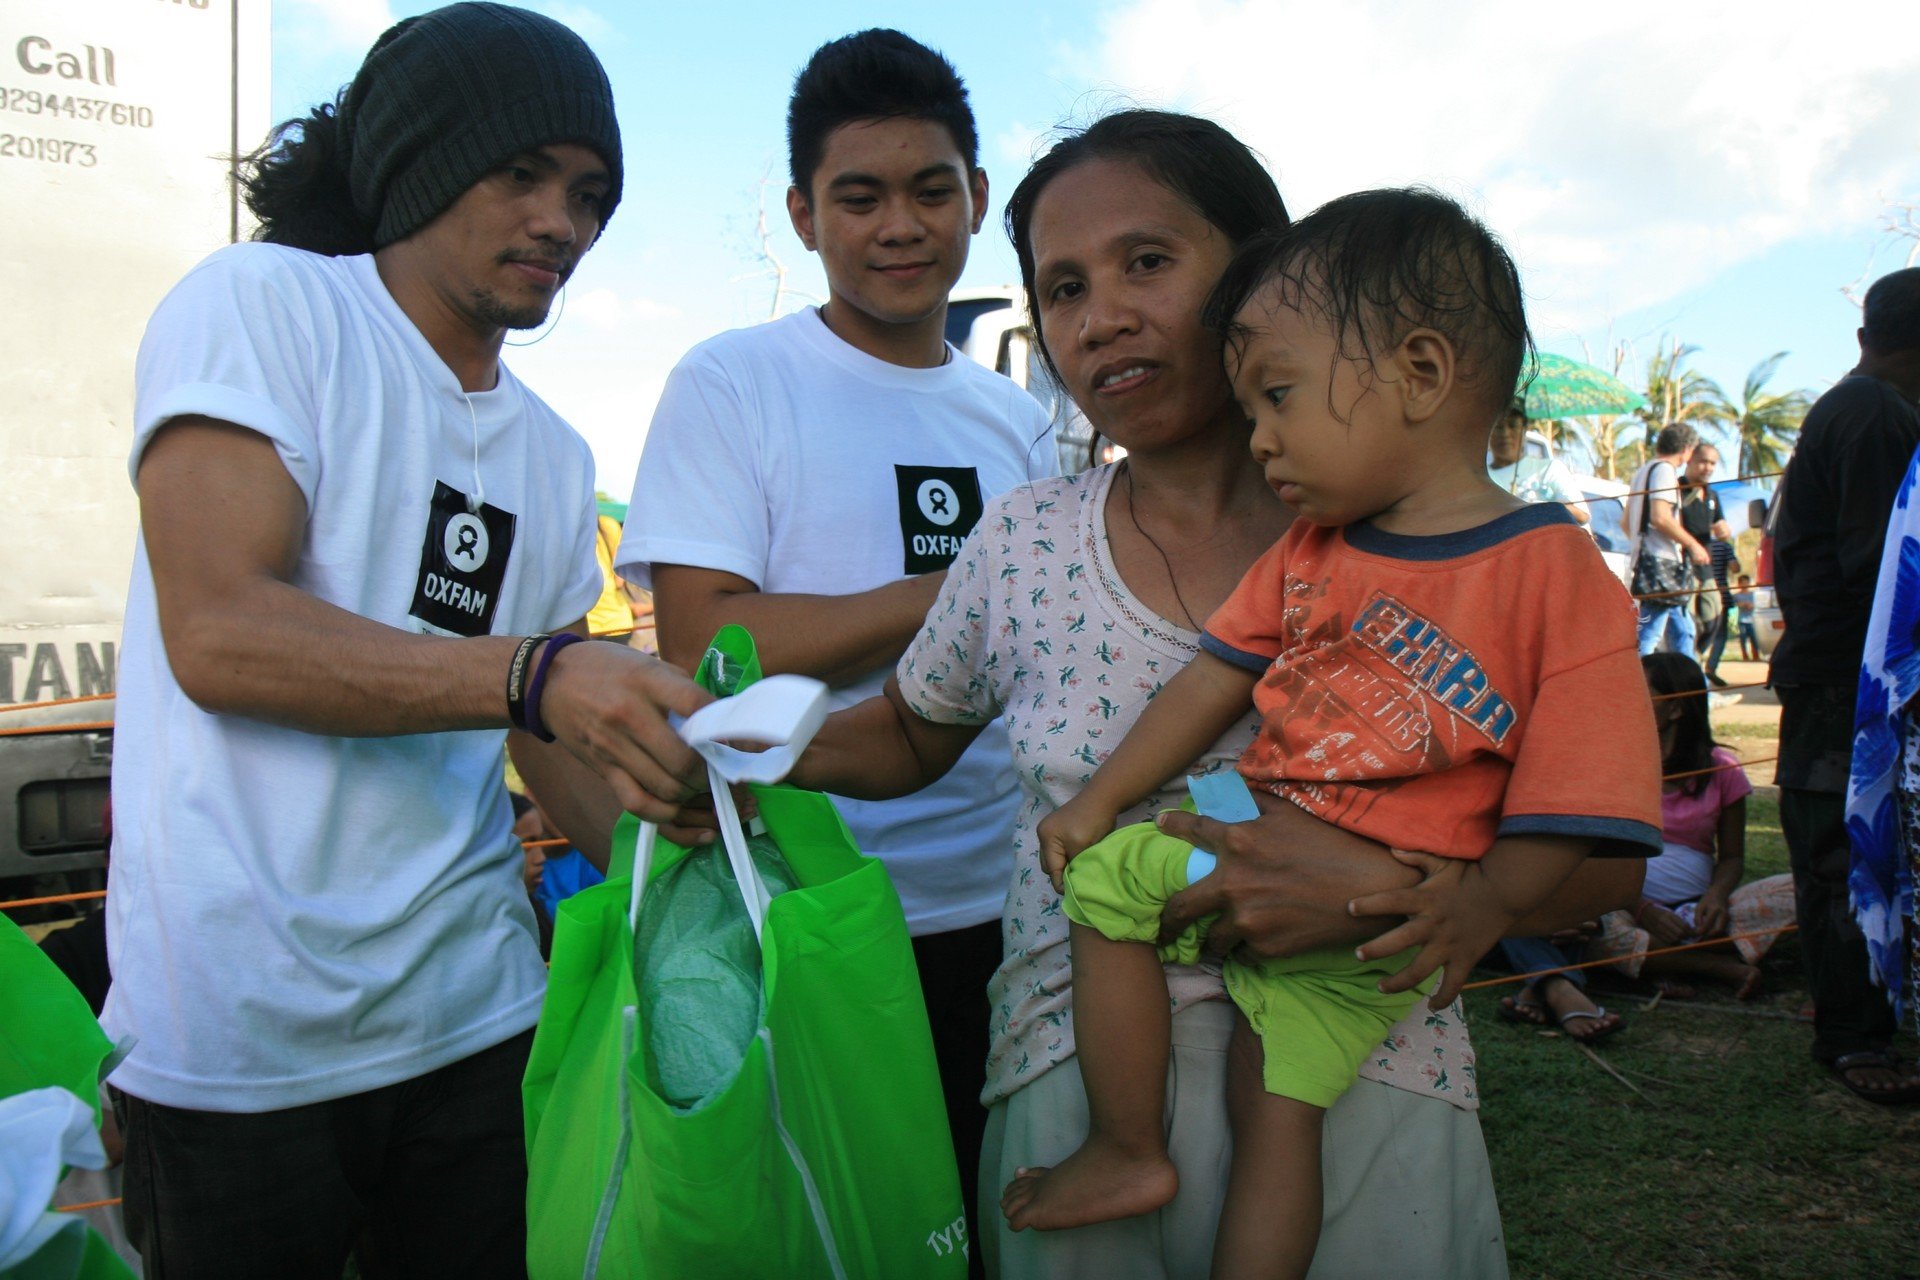 Dolor Moralde receiving a hygiene kit from Oxfam. The hygiene kit contains soap, a blanket, clean underwear and toothbrushes.